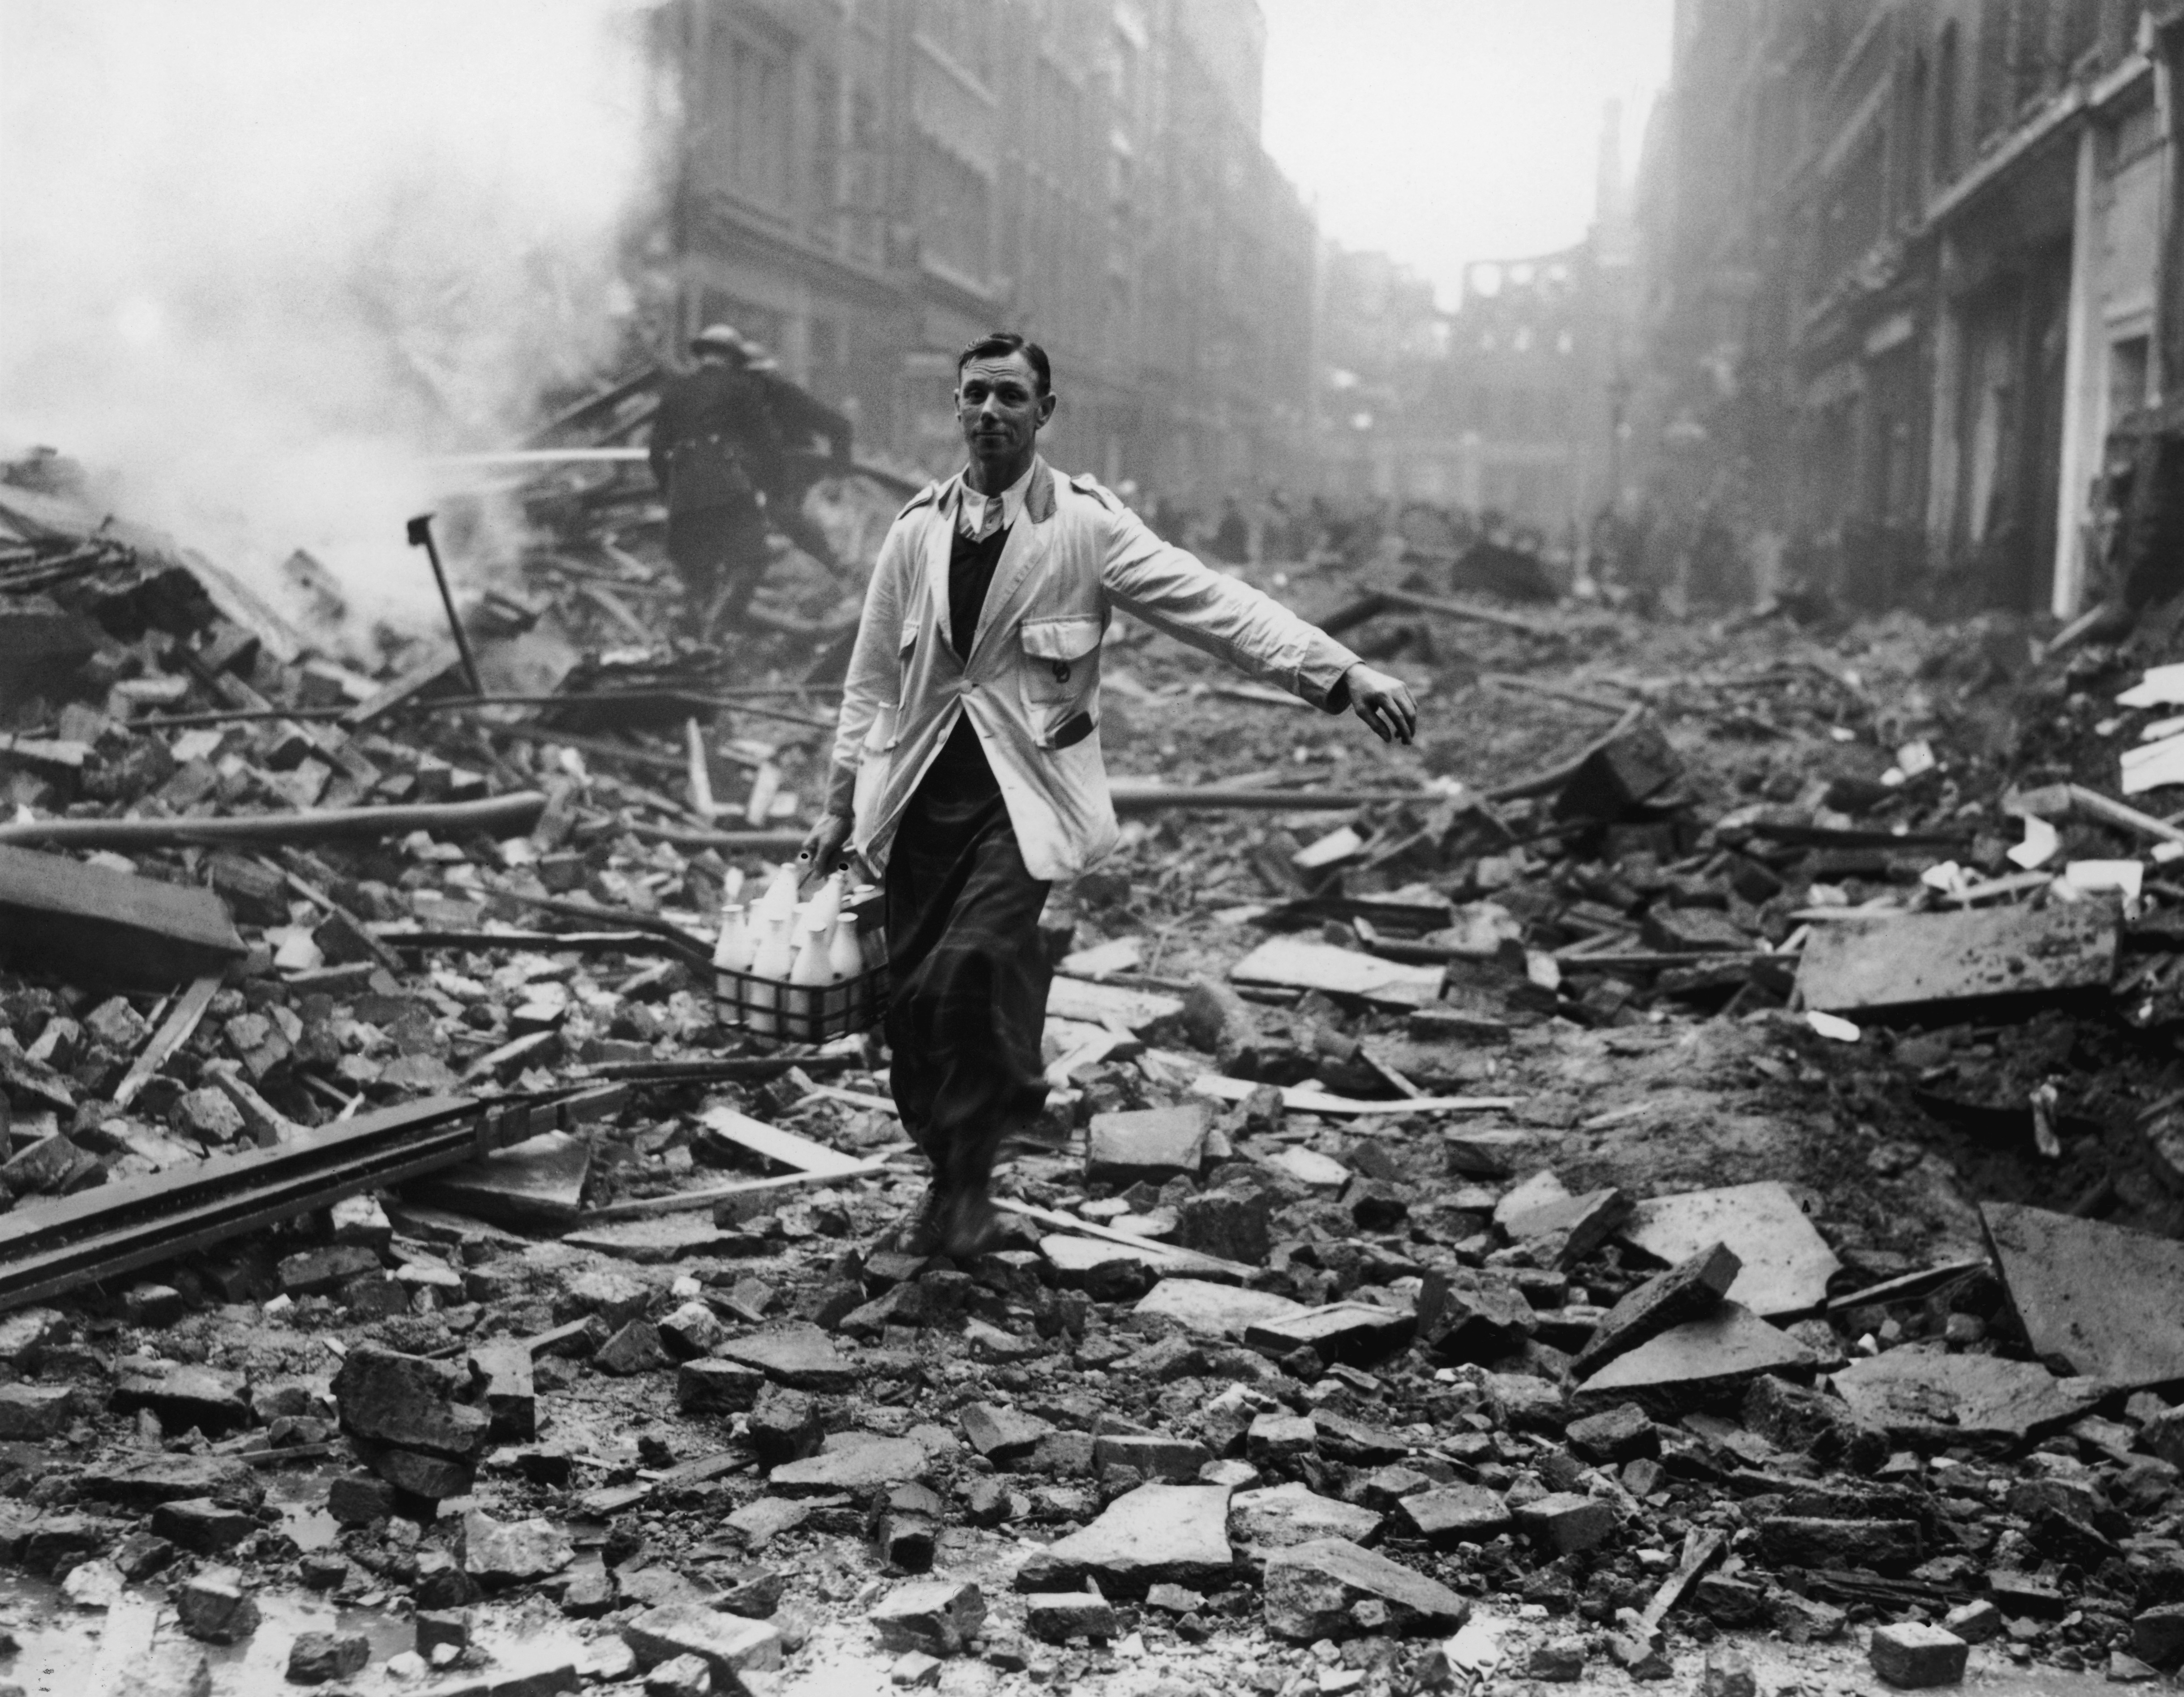 The London Milkman - Taken by Fred Morley during the London blitz on October 9, 1940, this photo portrays a milkman making his rounds on foot despite the devastation around him. Intended to raise spirits by potently displaying the spirit of British stoicism during wartime, the picture was actually staged. Morley’s assistant borrowed a milkman’s outfit and a bottle rack, and Morley found some firefighters for him to pose in front of. The government censors had restricted the publication of anything that might cause panic, but Morley circumvented this by depicting normal life carrying on despite the carnage. It worked, and the photo was published the next day.